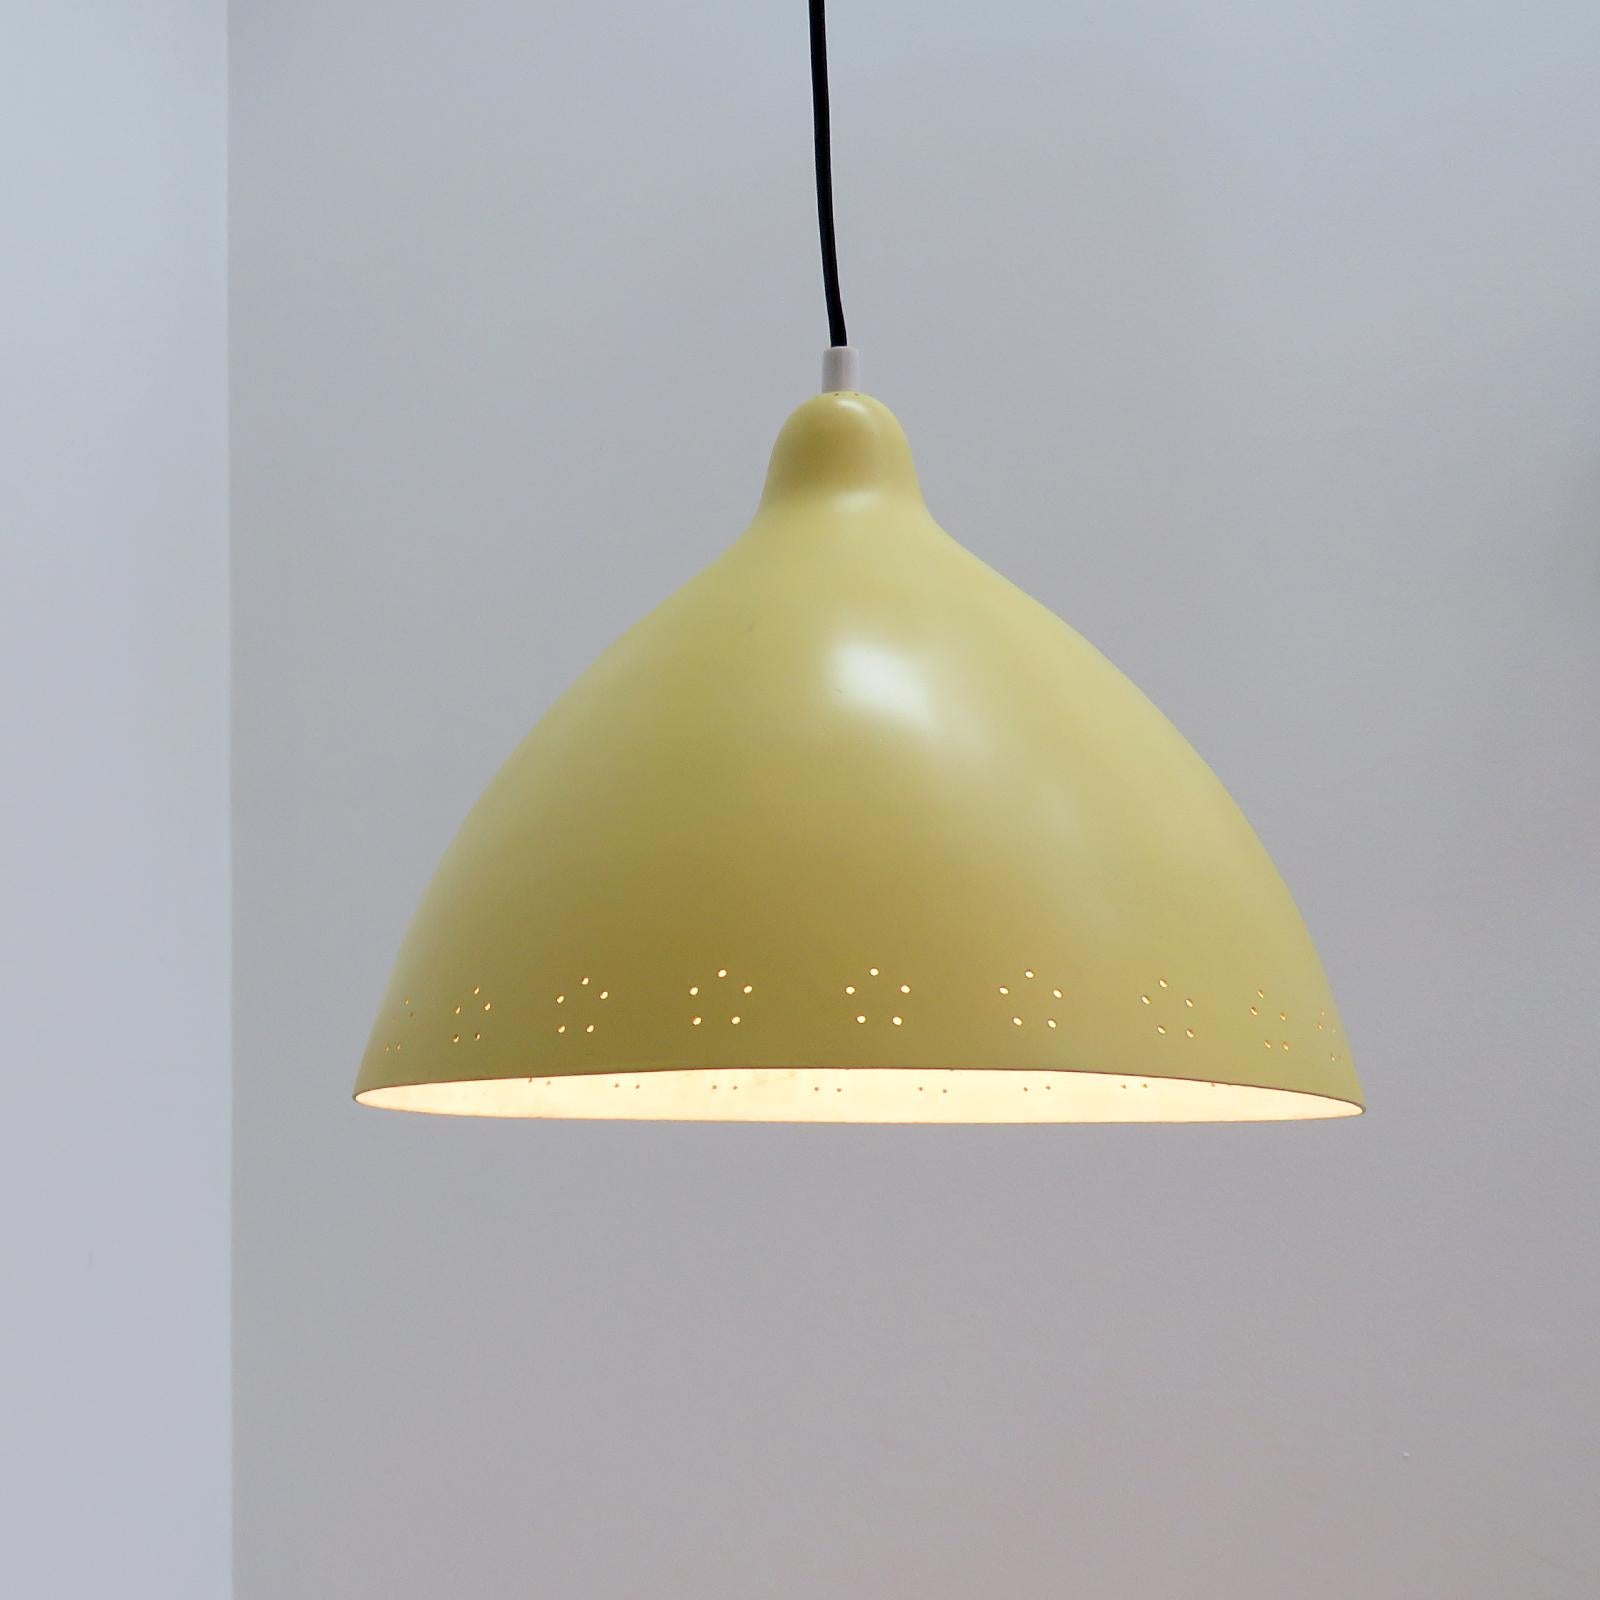 Metal Swing Arm Wall Lights by Lisa Johansson-Pape for Orno, 1960 For Sale